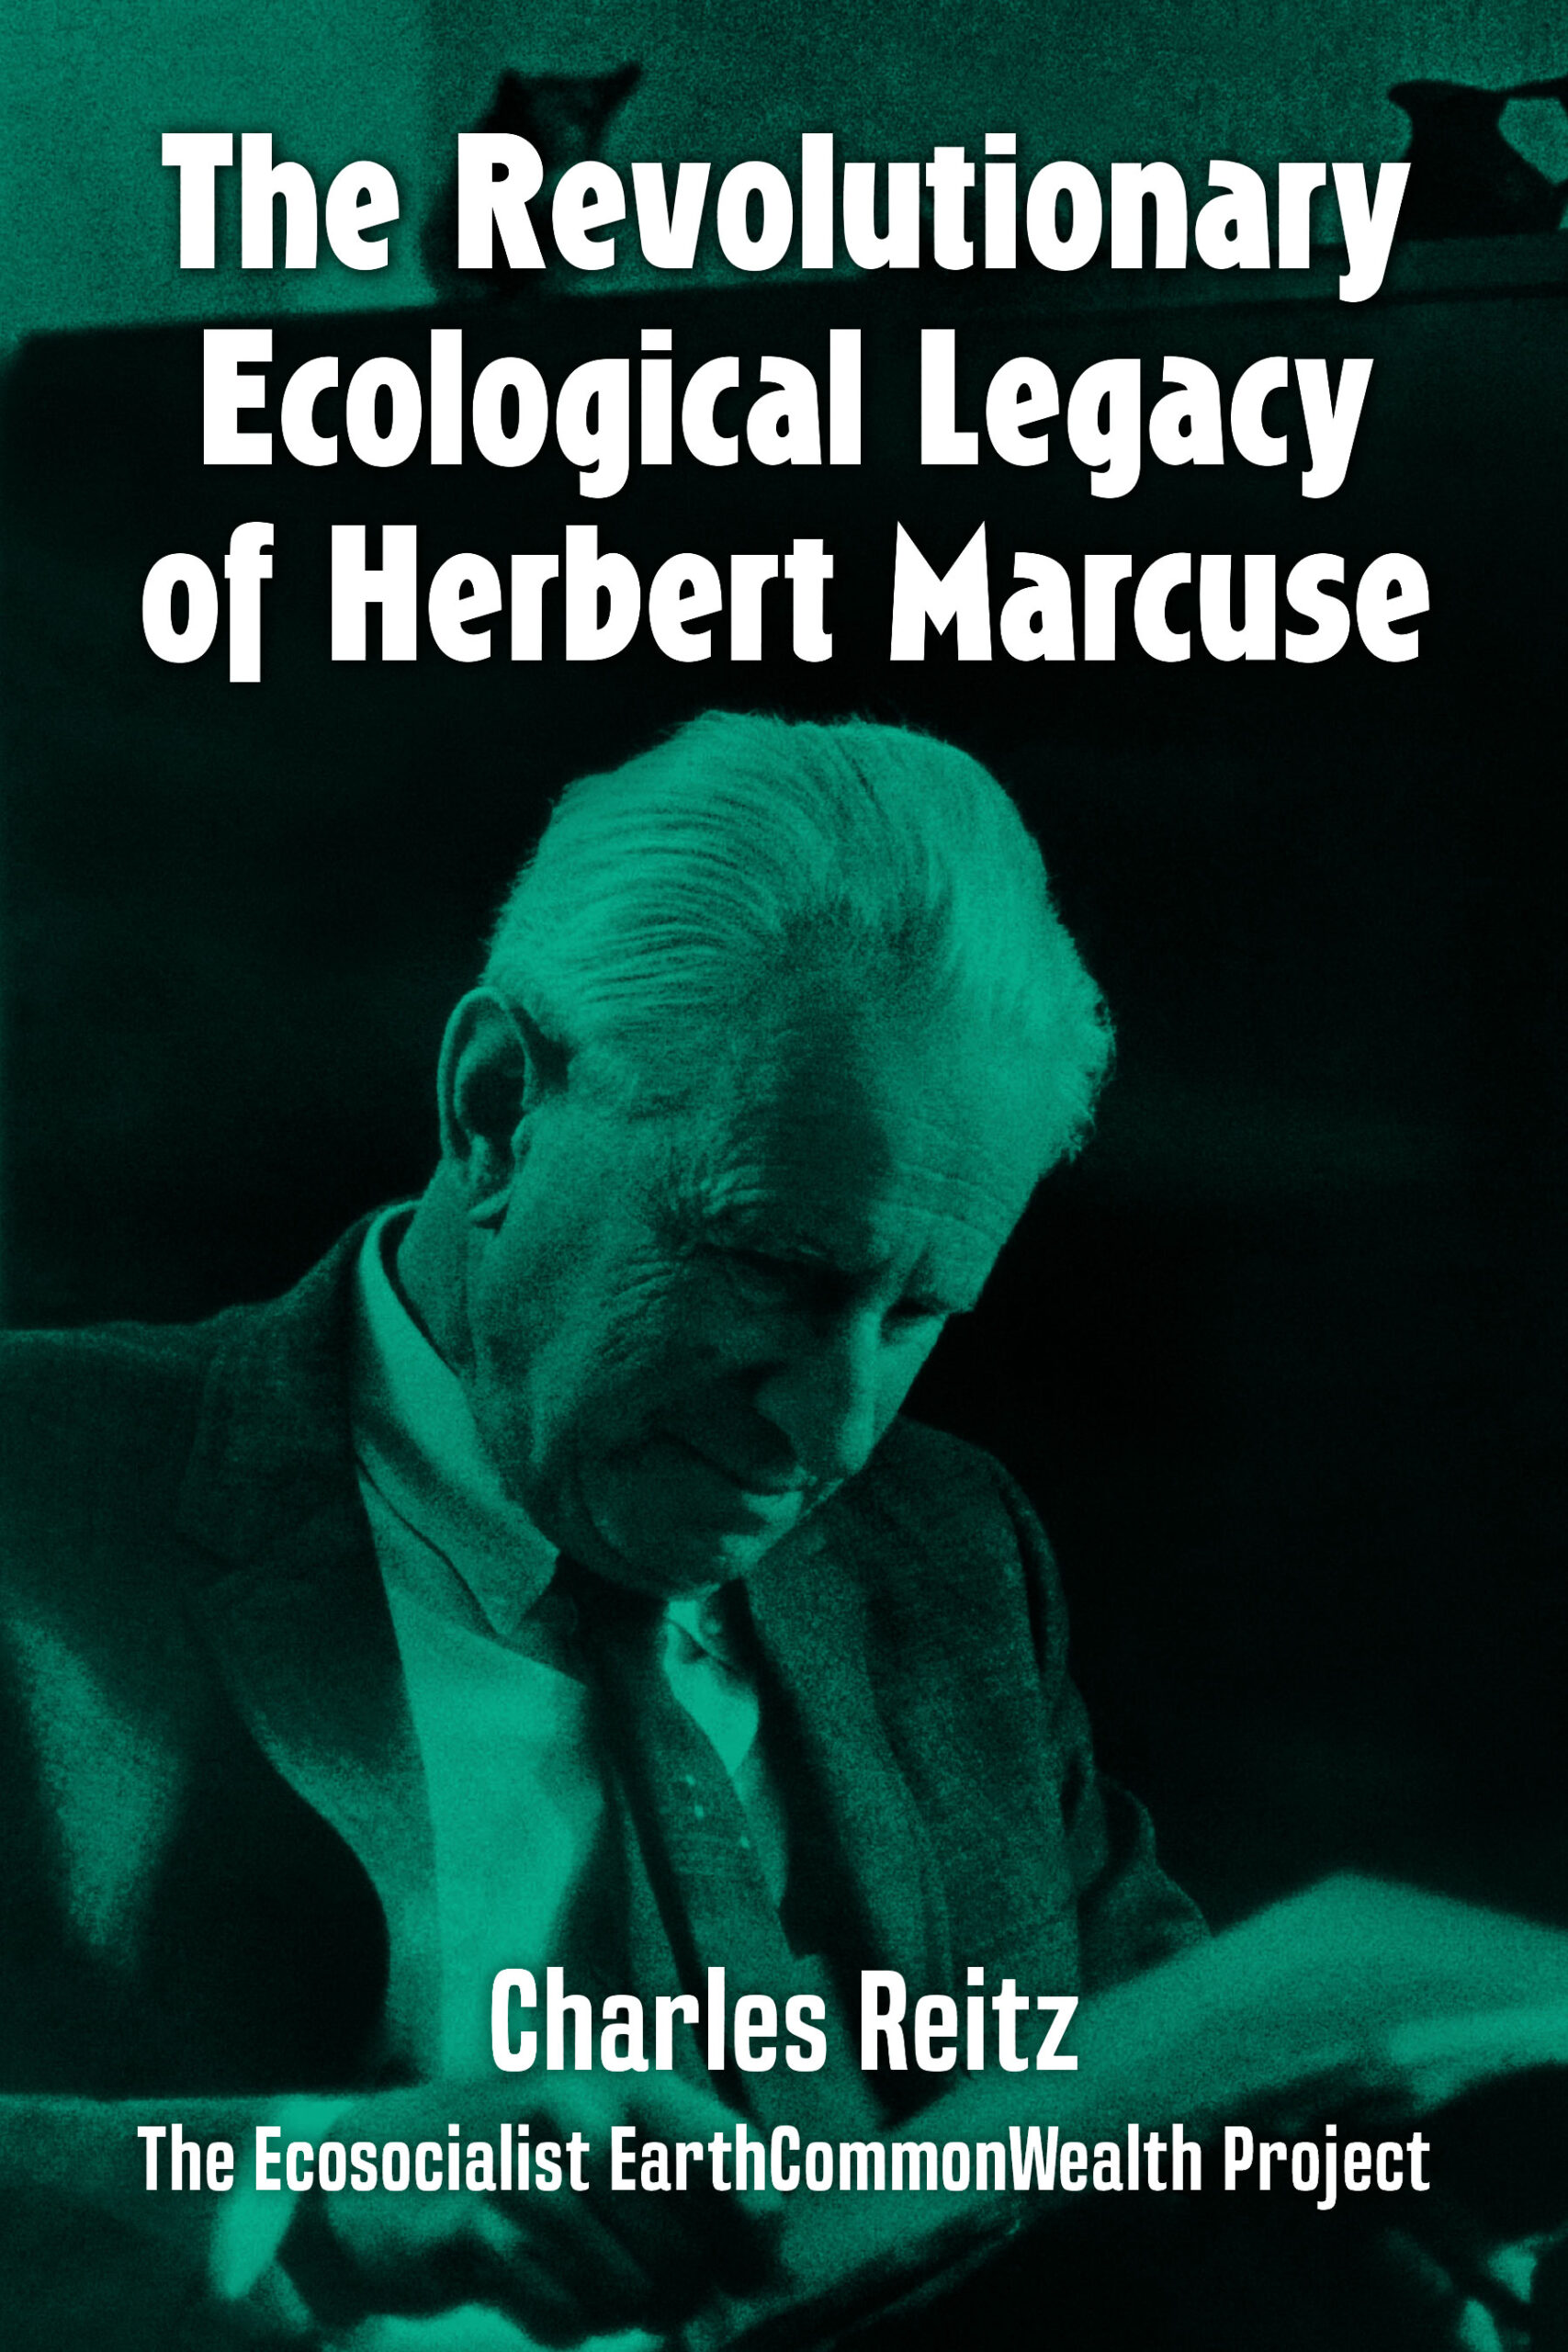 The Revolutionary Ecological Legacy of Herbert Marcuse